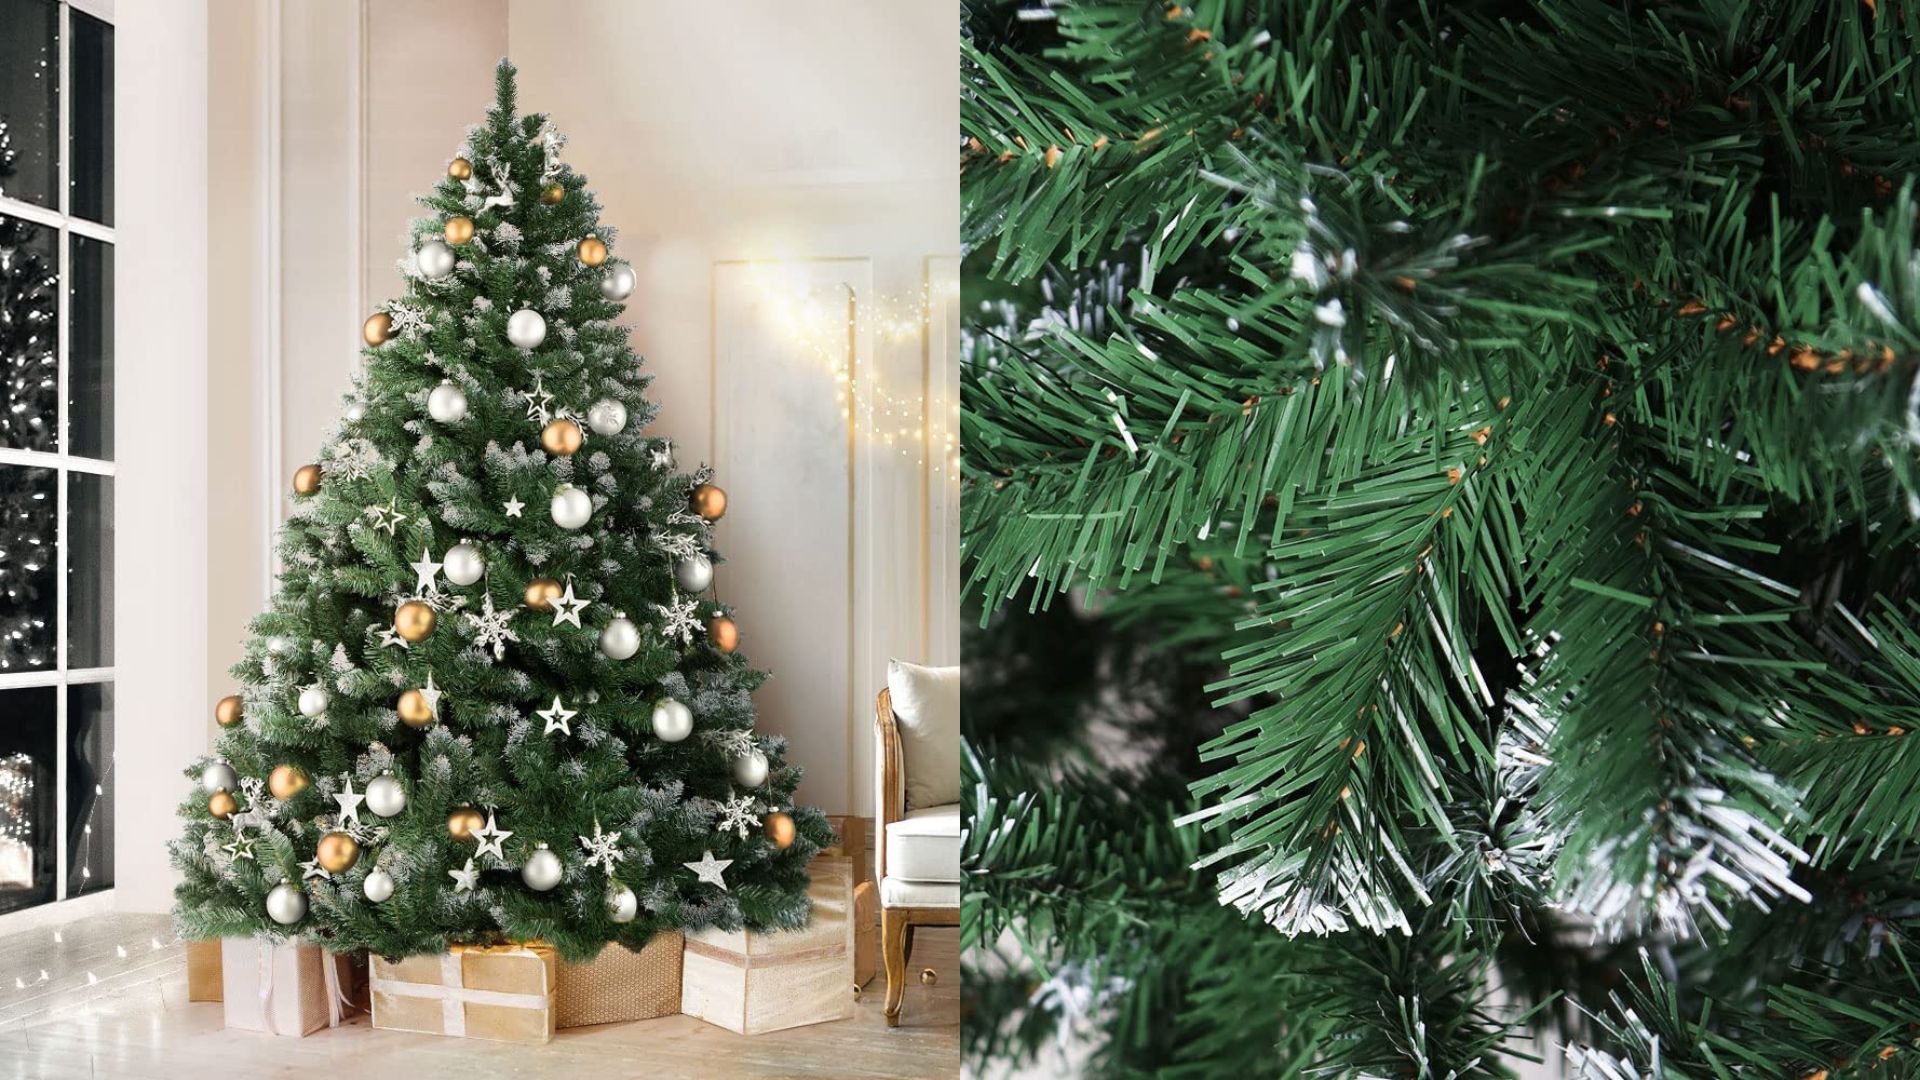 Best traditional Christmas trees